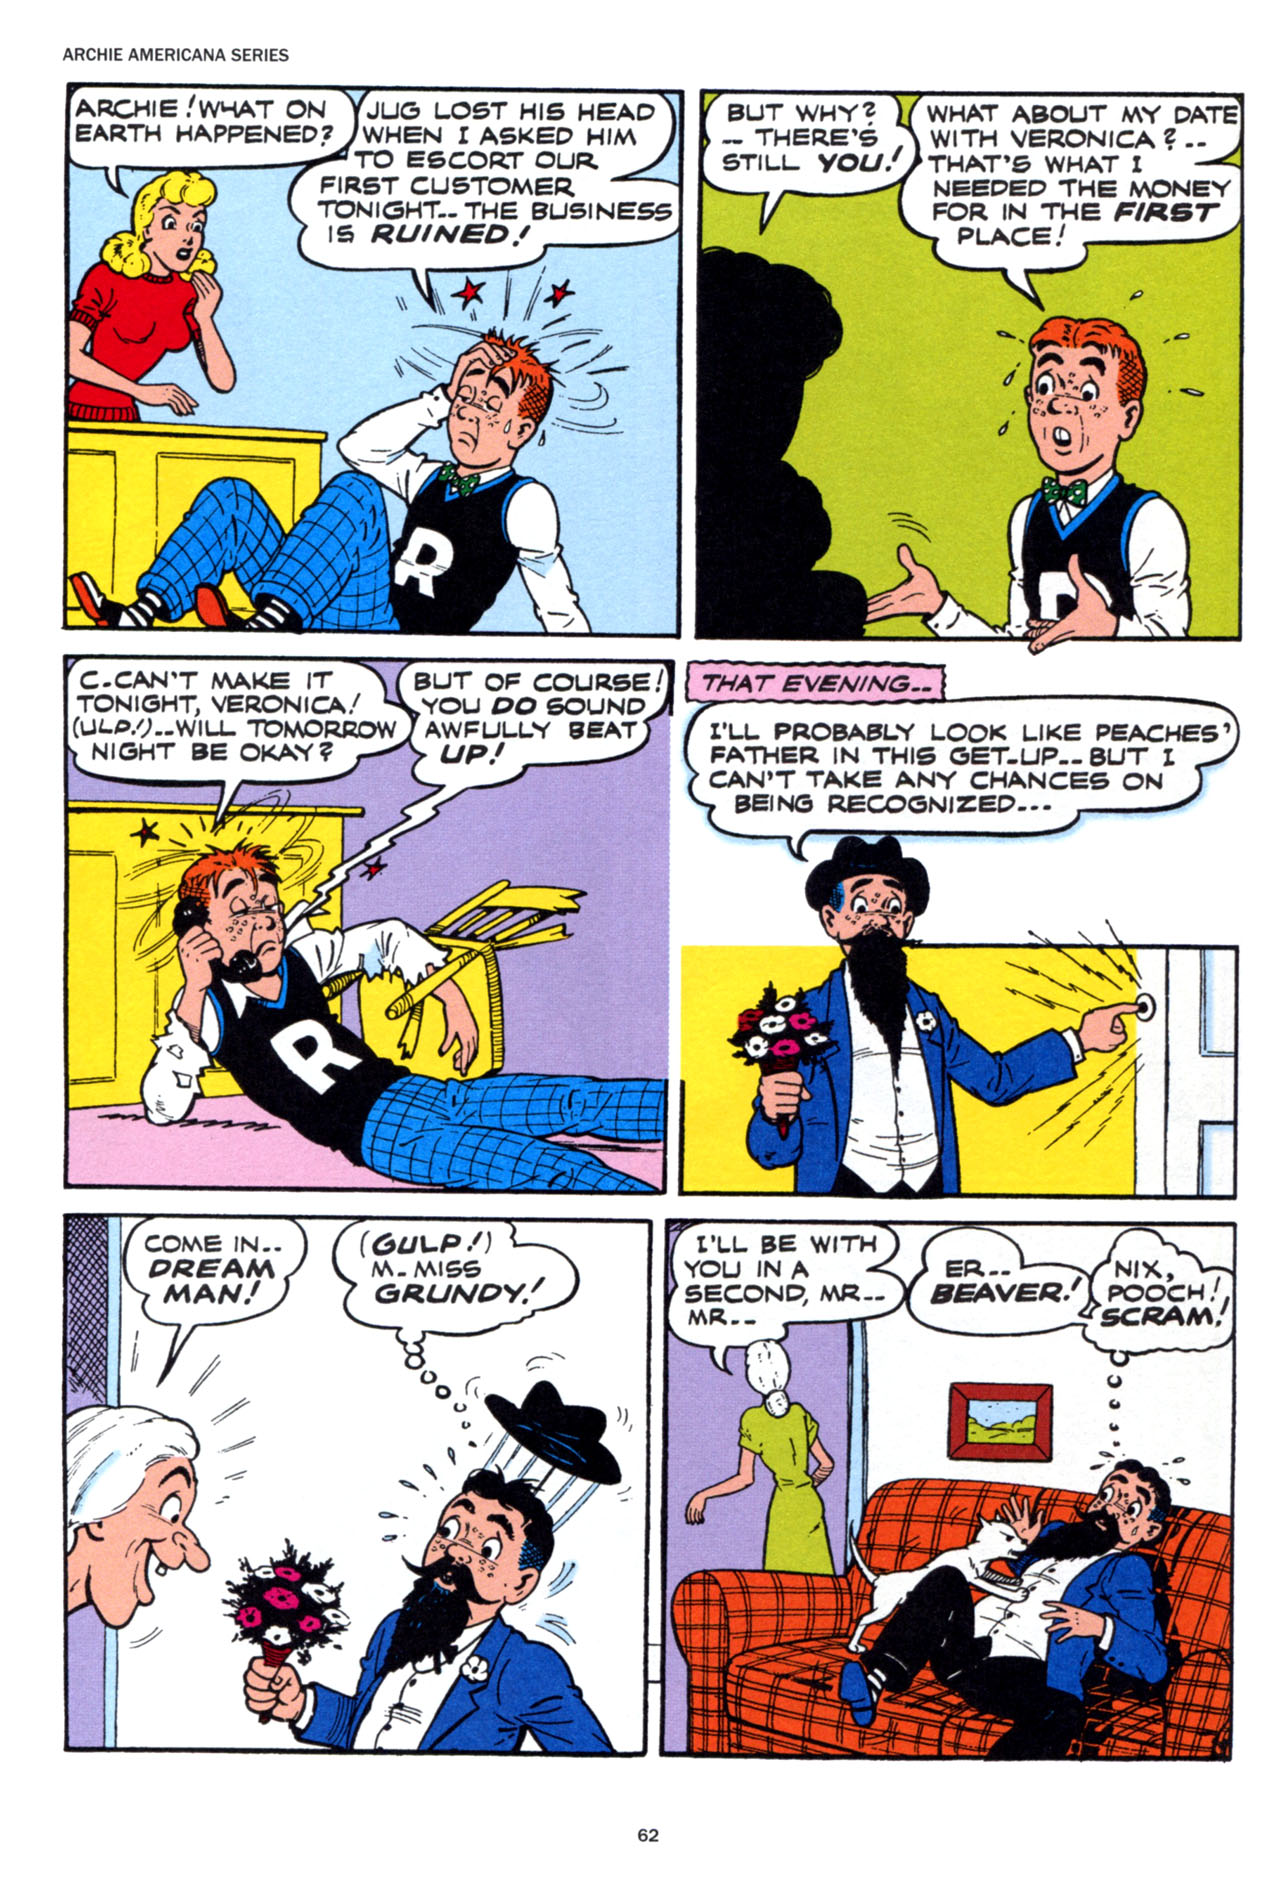 Read online Archie Americana Series comic -  Issue # TPB 6 - 63